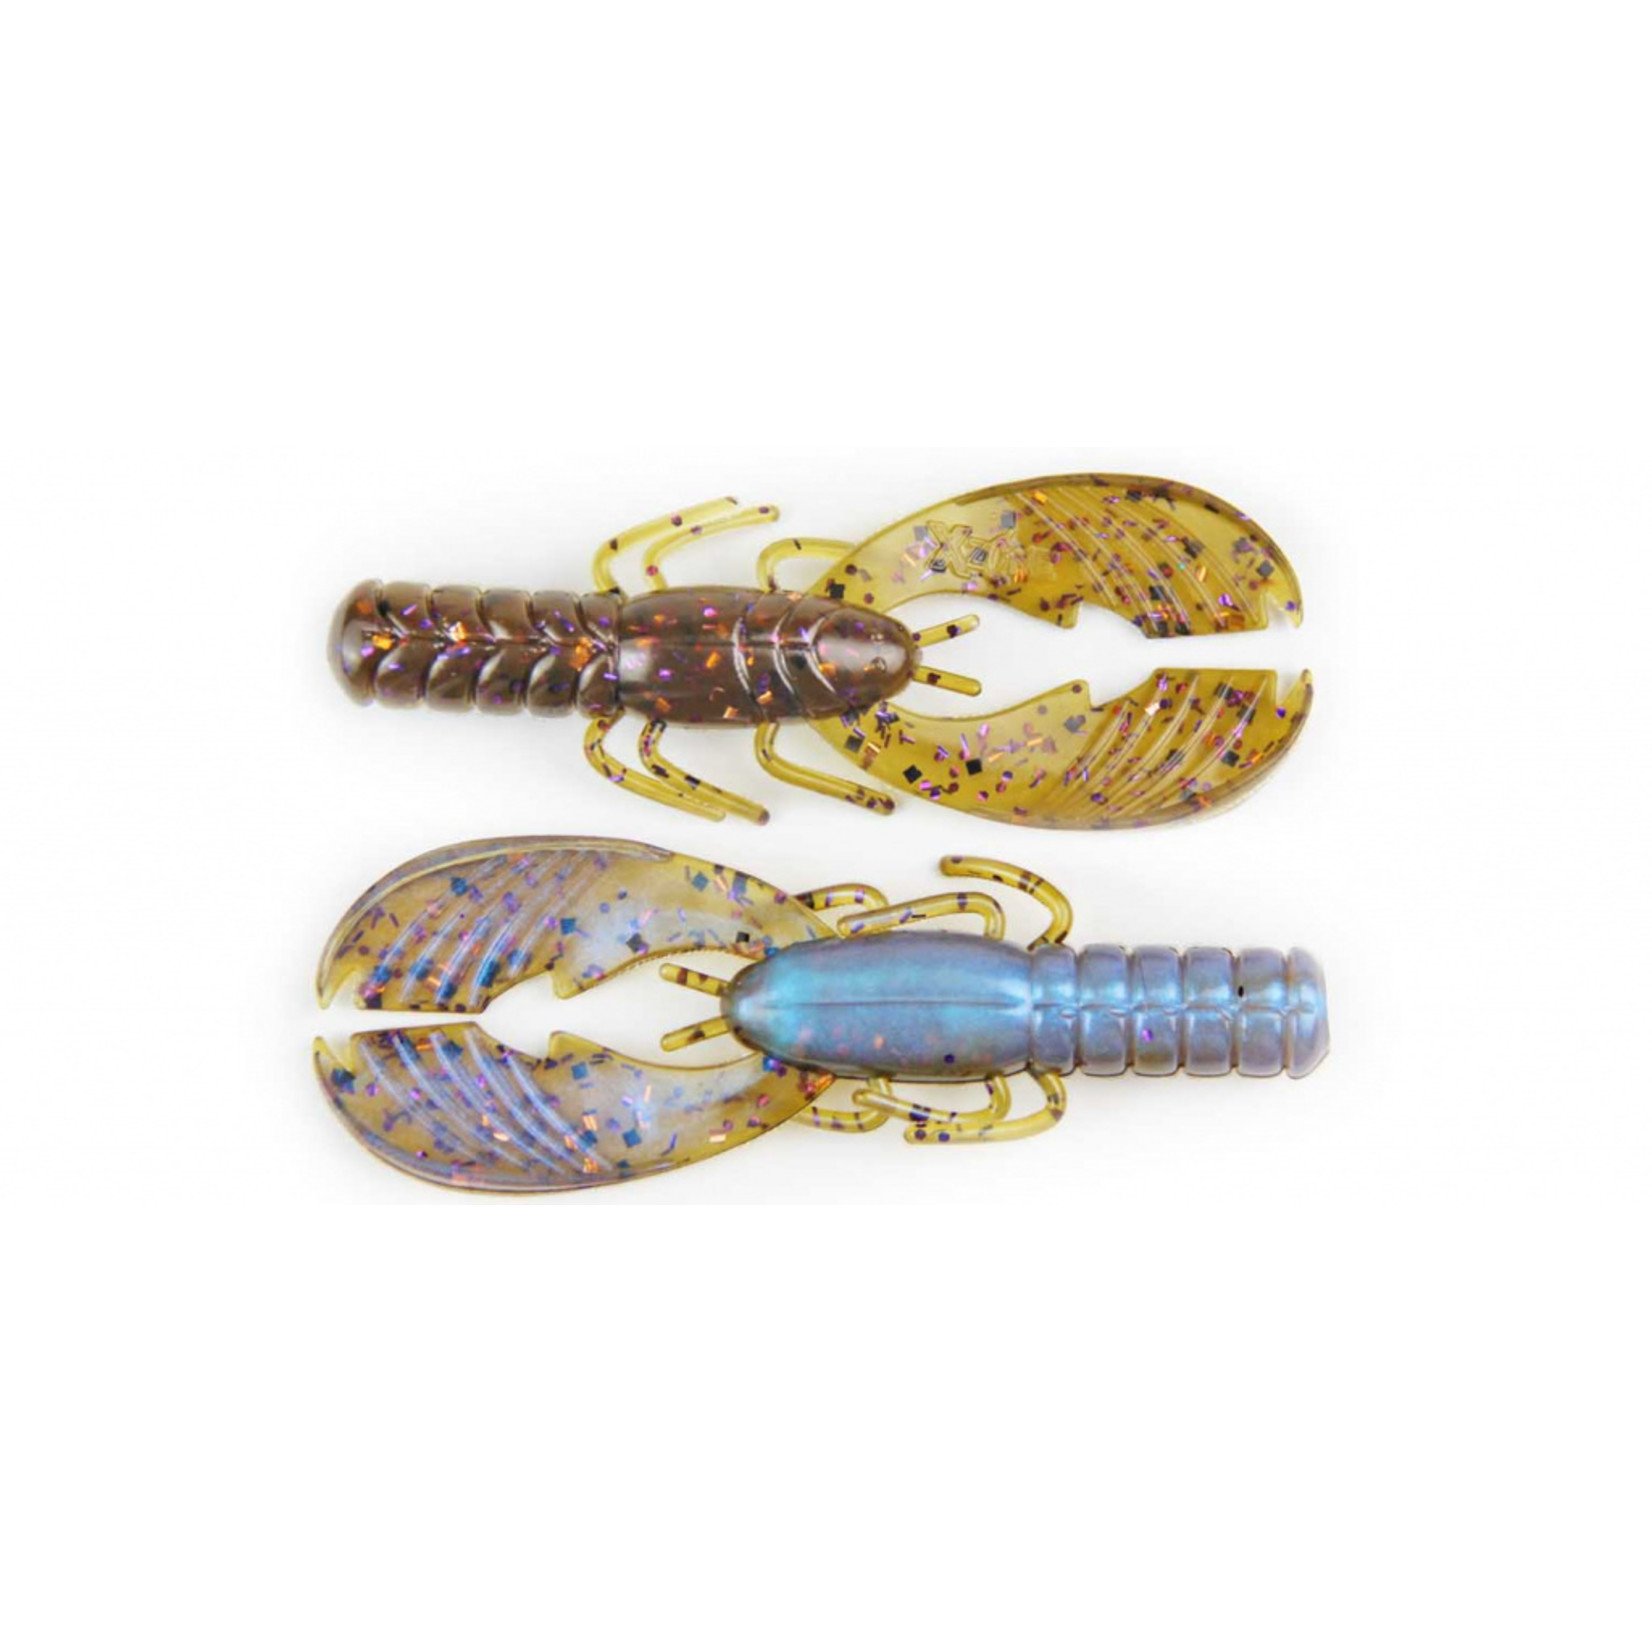 X Zone Lures X Zone Lures 4" Muscle Back Craw